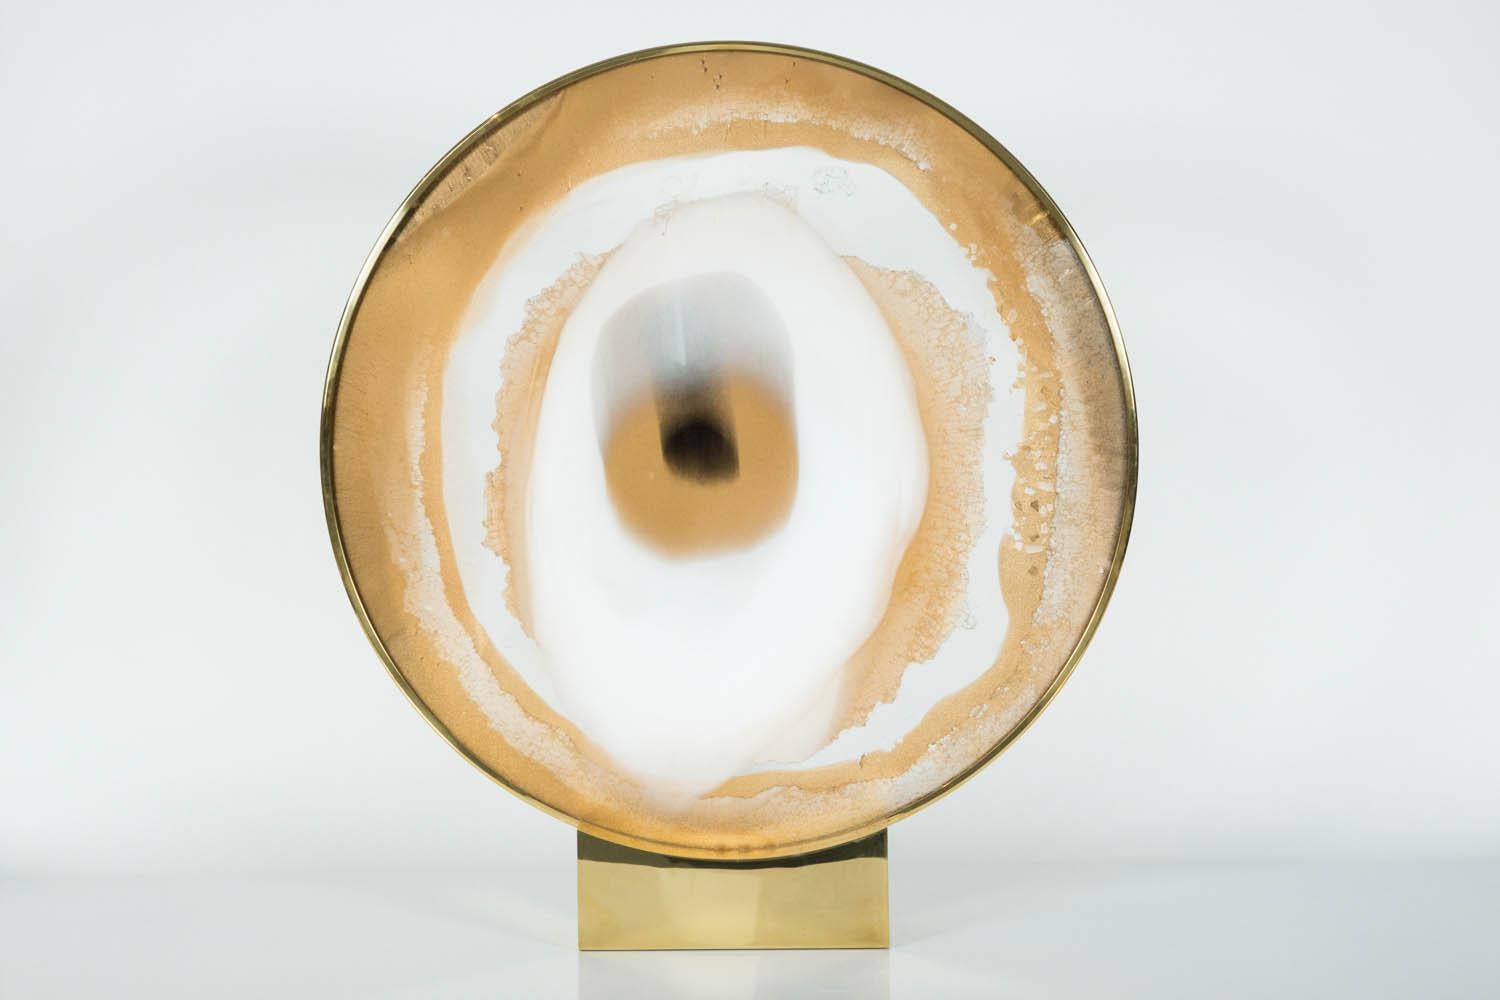 Art Glass 'Eye of Integrity I' Unique Glass Sculpture by Yorgos Papadopoulos